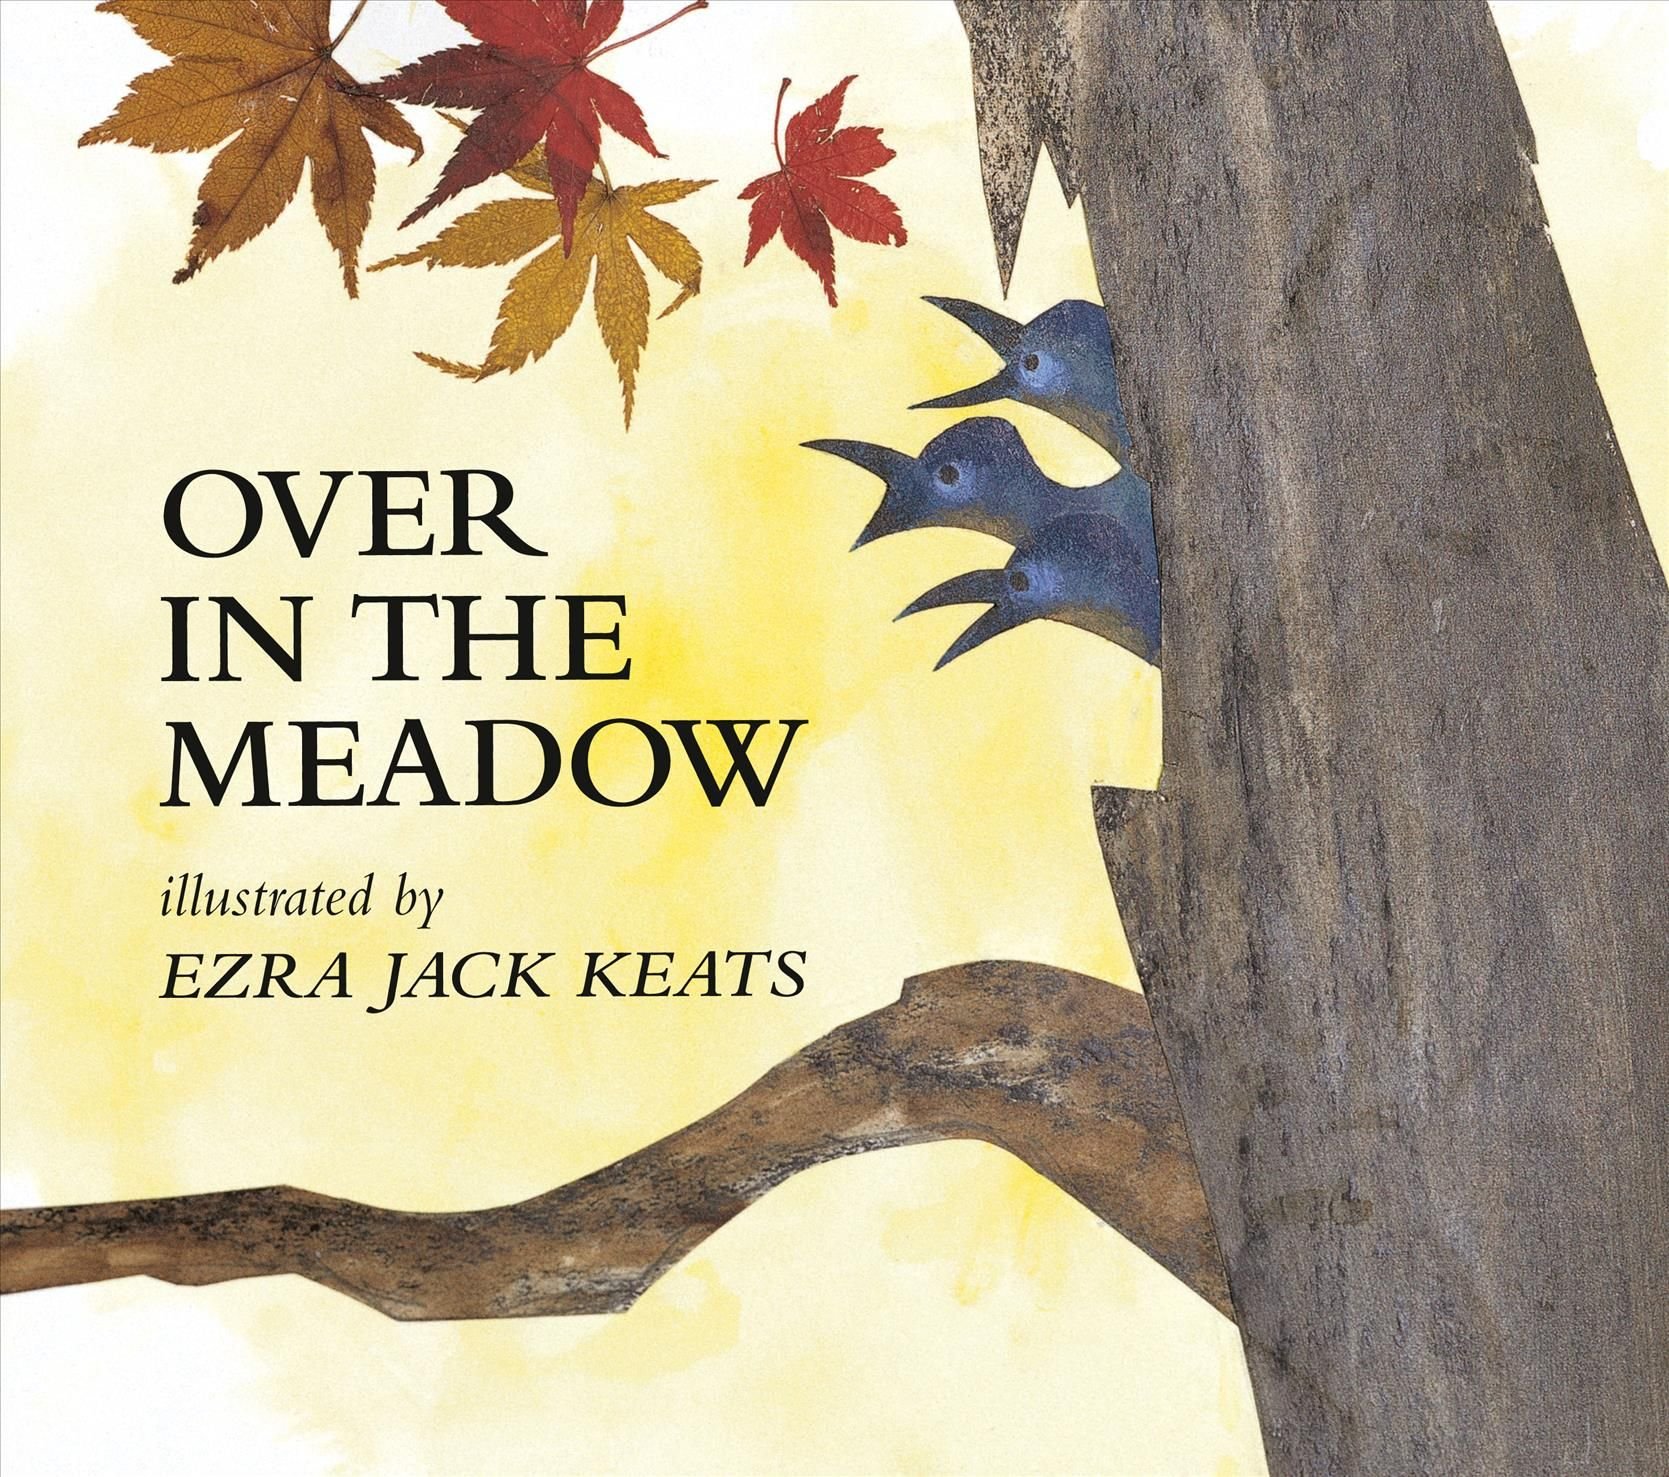 Buy　Jack　Free　Over　in　Meadow　the　With　by　Ezra　Keats　Delivery